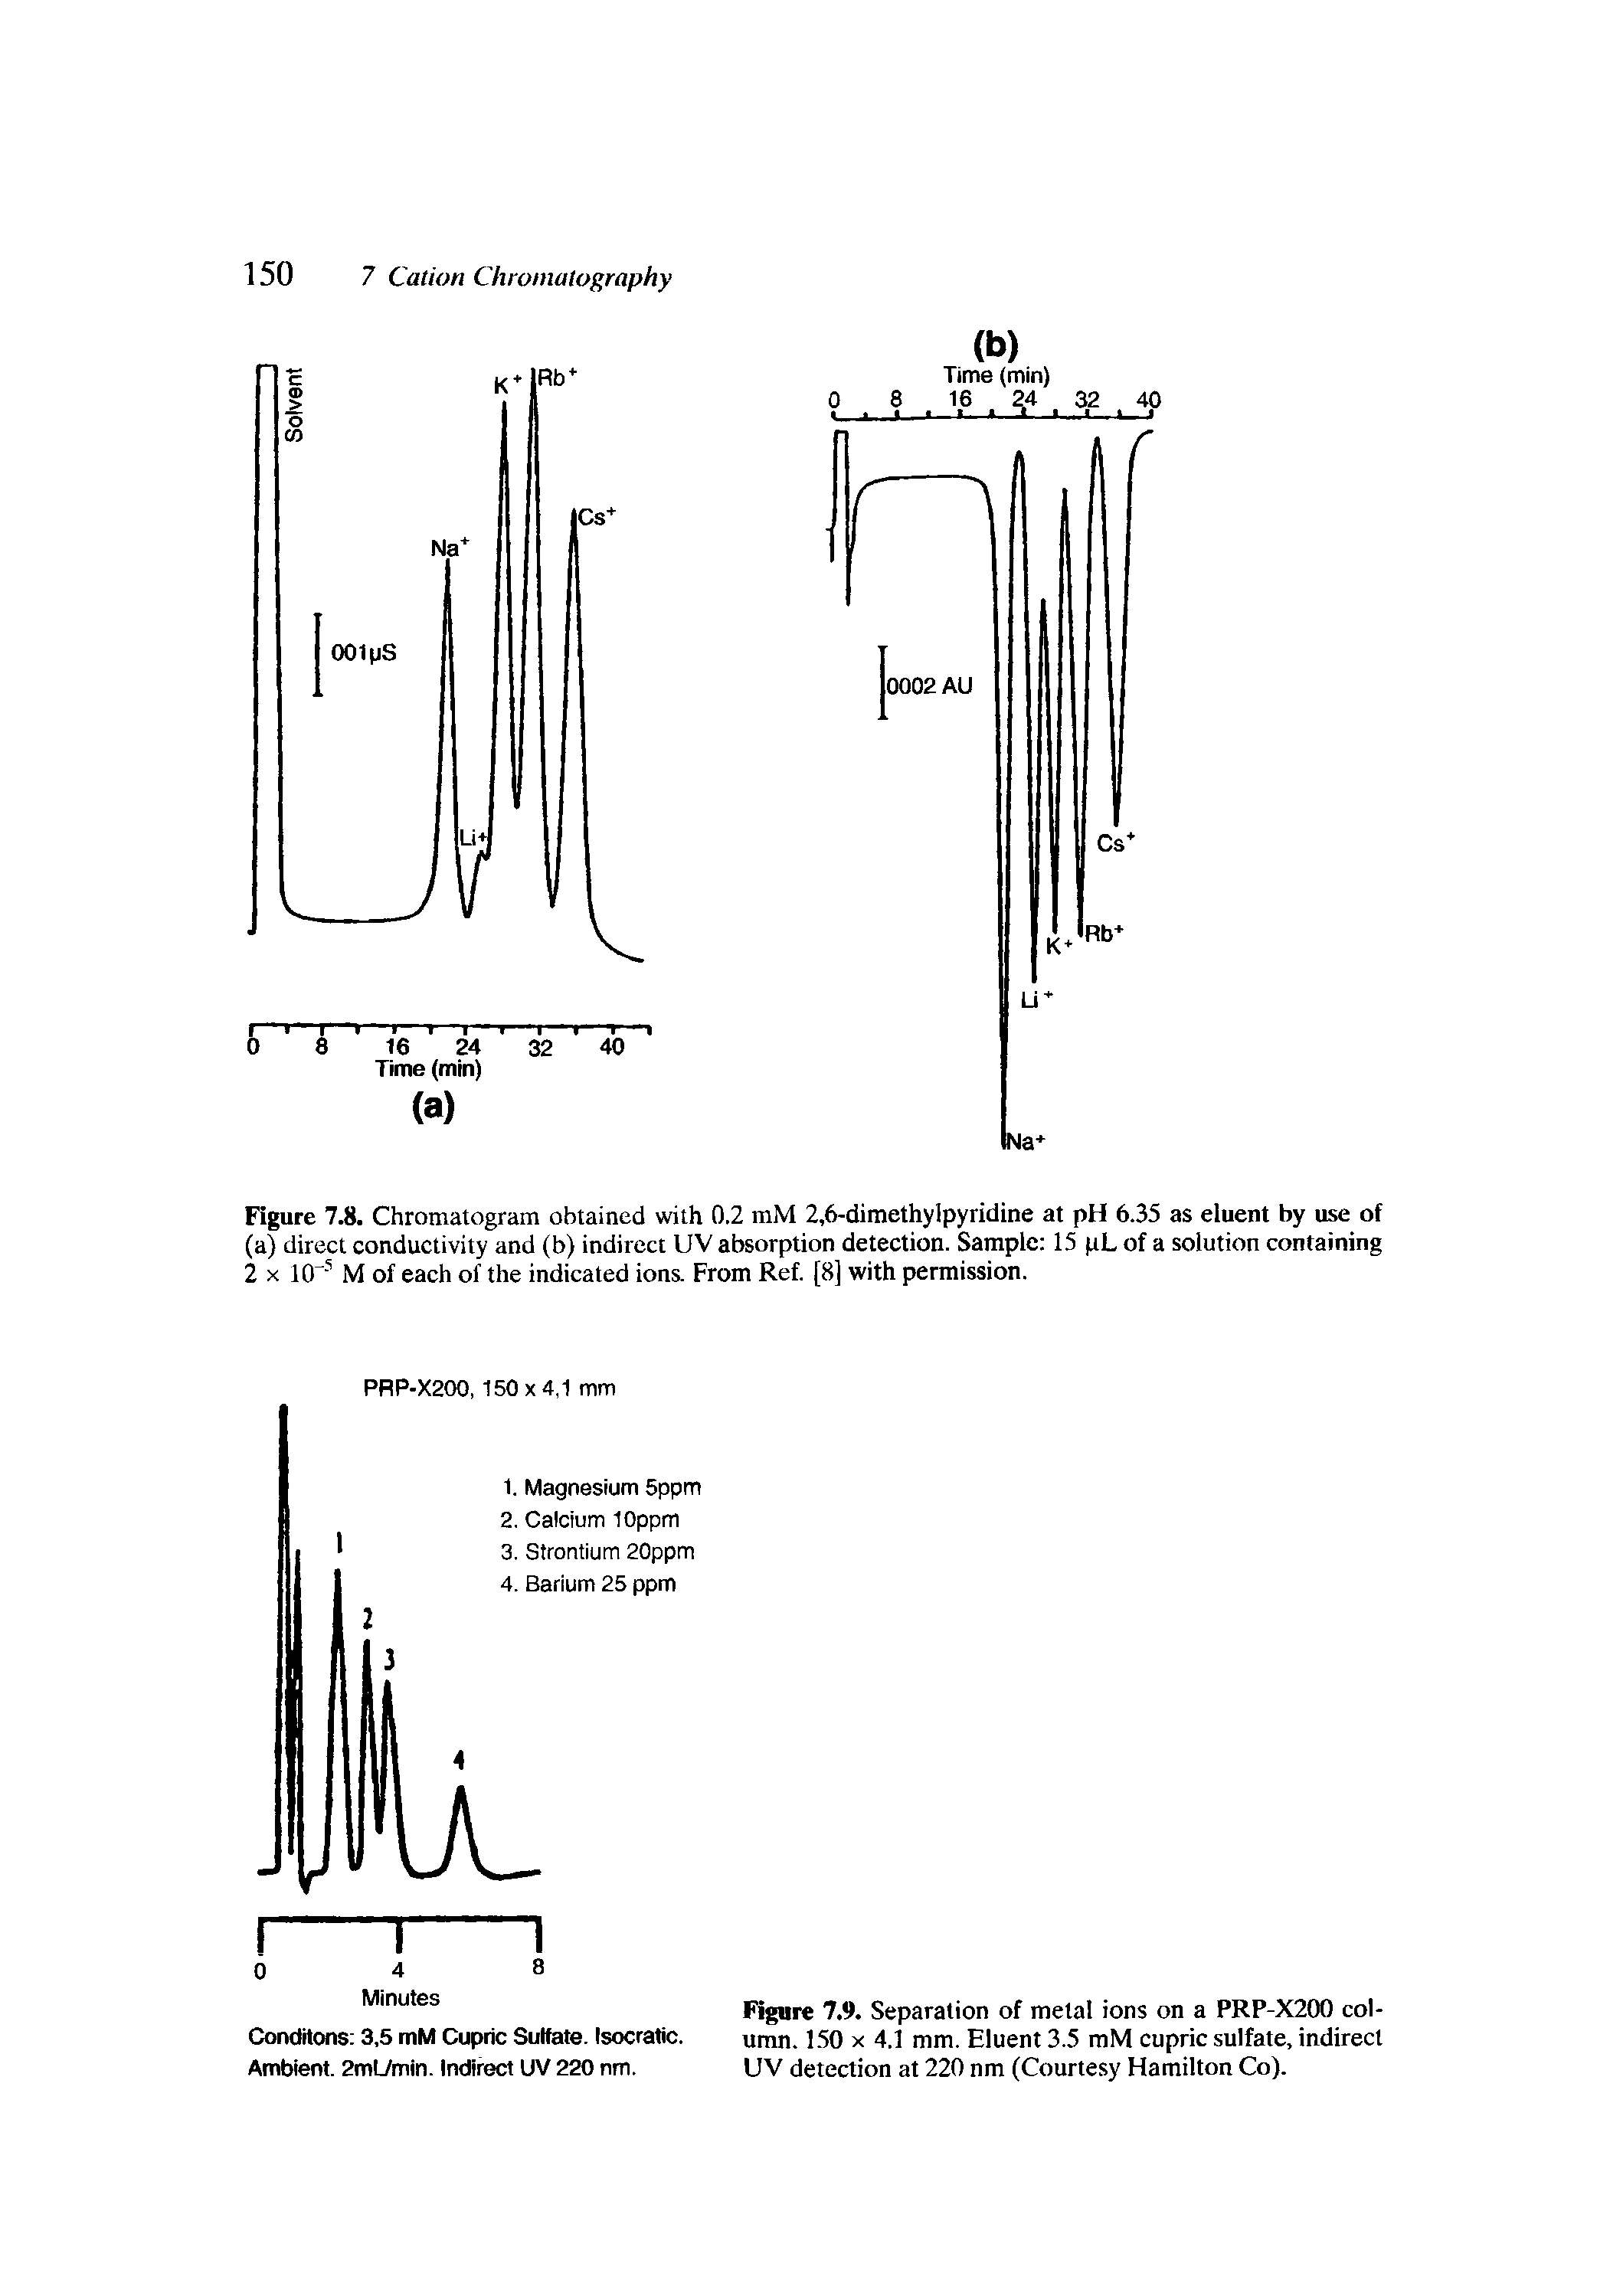 Figure 7.9. Separation of metal ions on a PRP-X200 column. 1.50 X 4.1 mm. Eluent 3.5 mM cupric sulfate, indirect UV detection at 220 nm (Courtesy Hamilton Co).